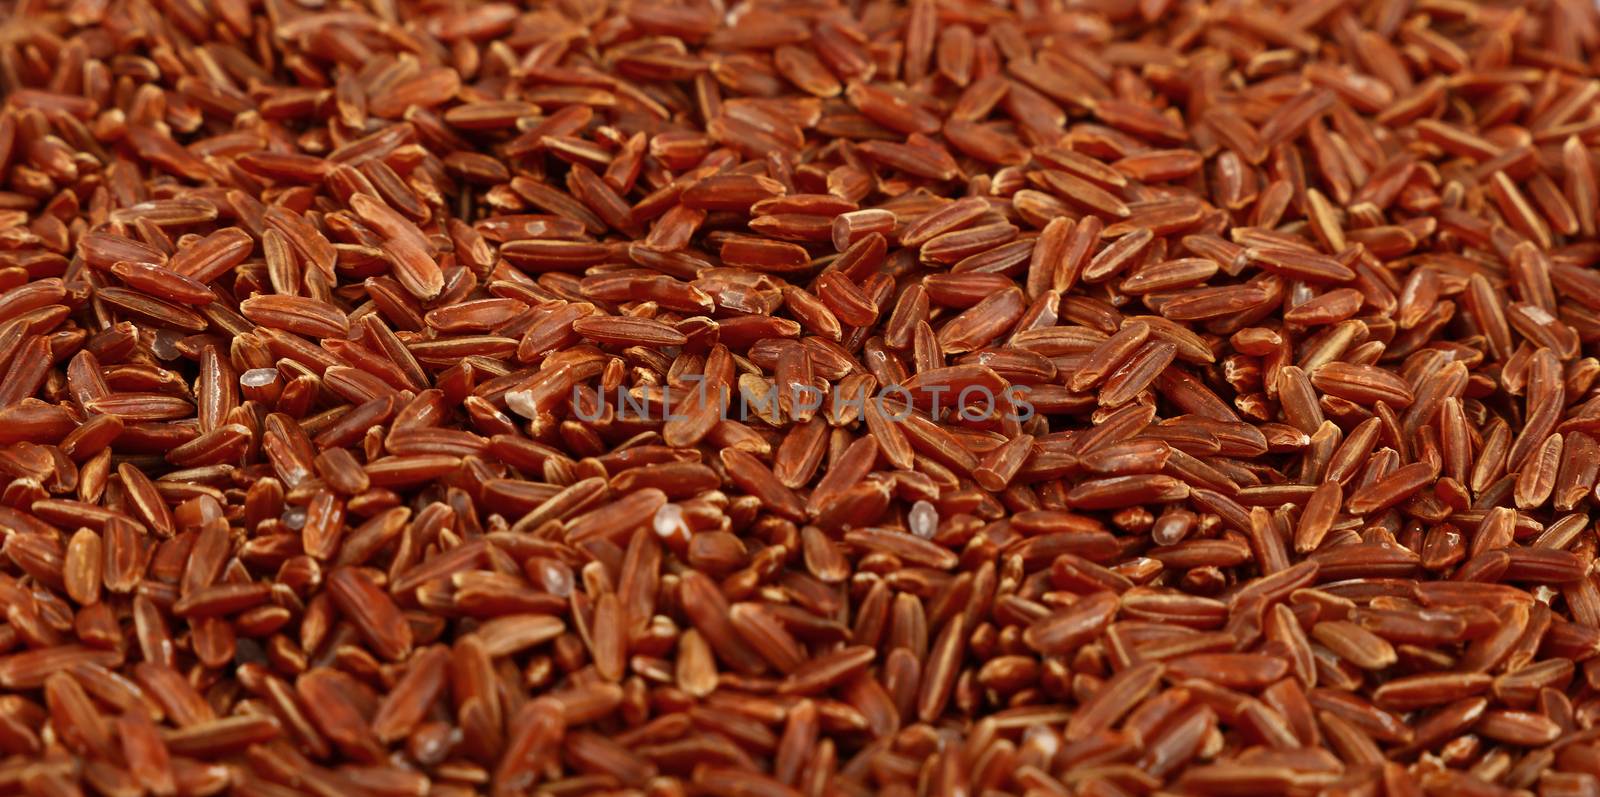 Red brown raw long grain rice close up pattern background, low angle view, selective focus